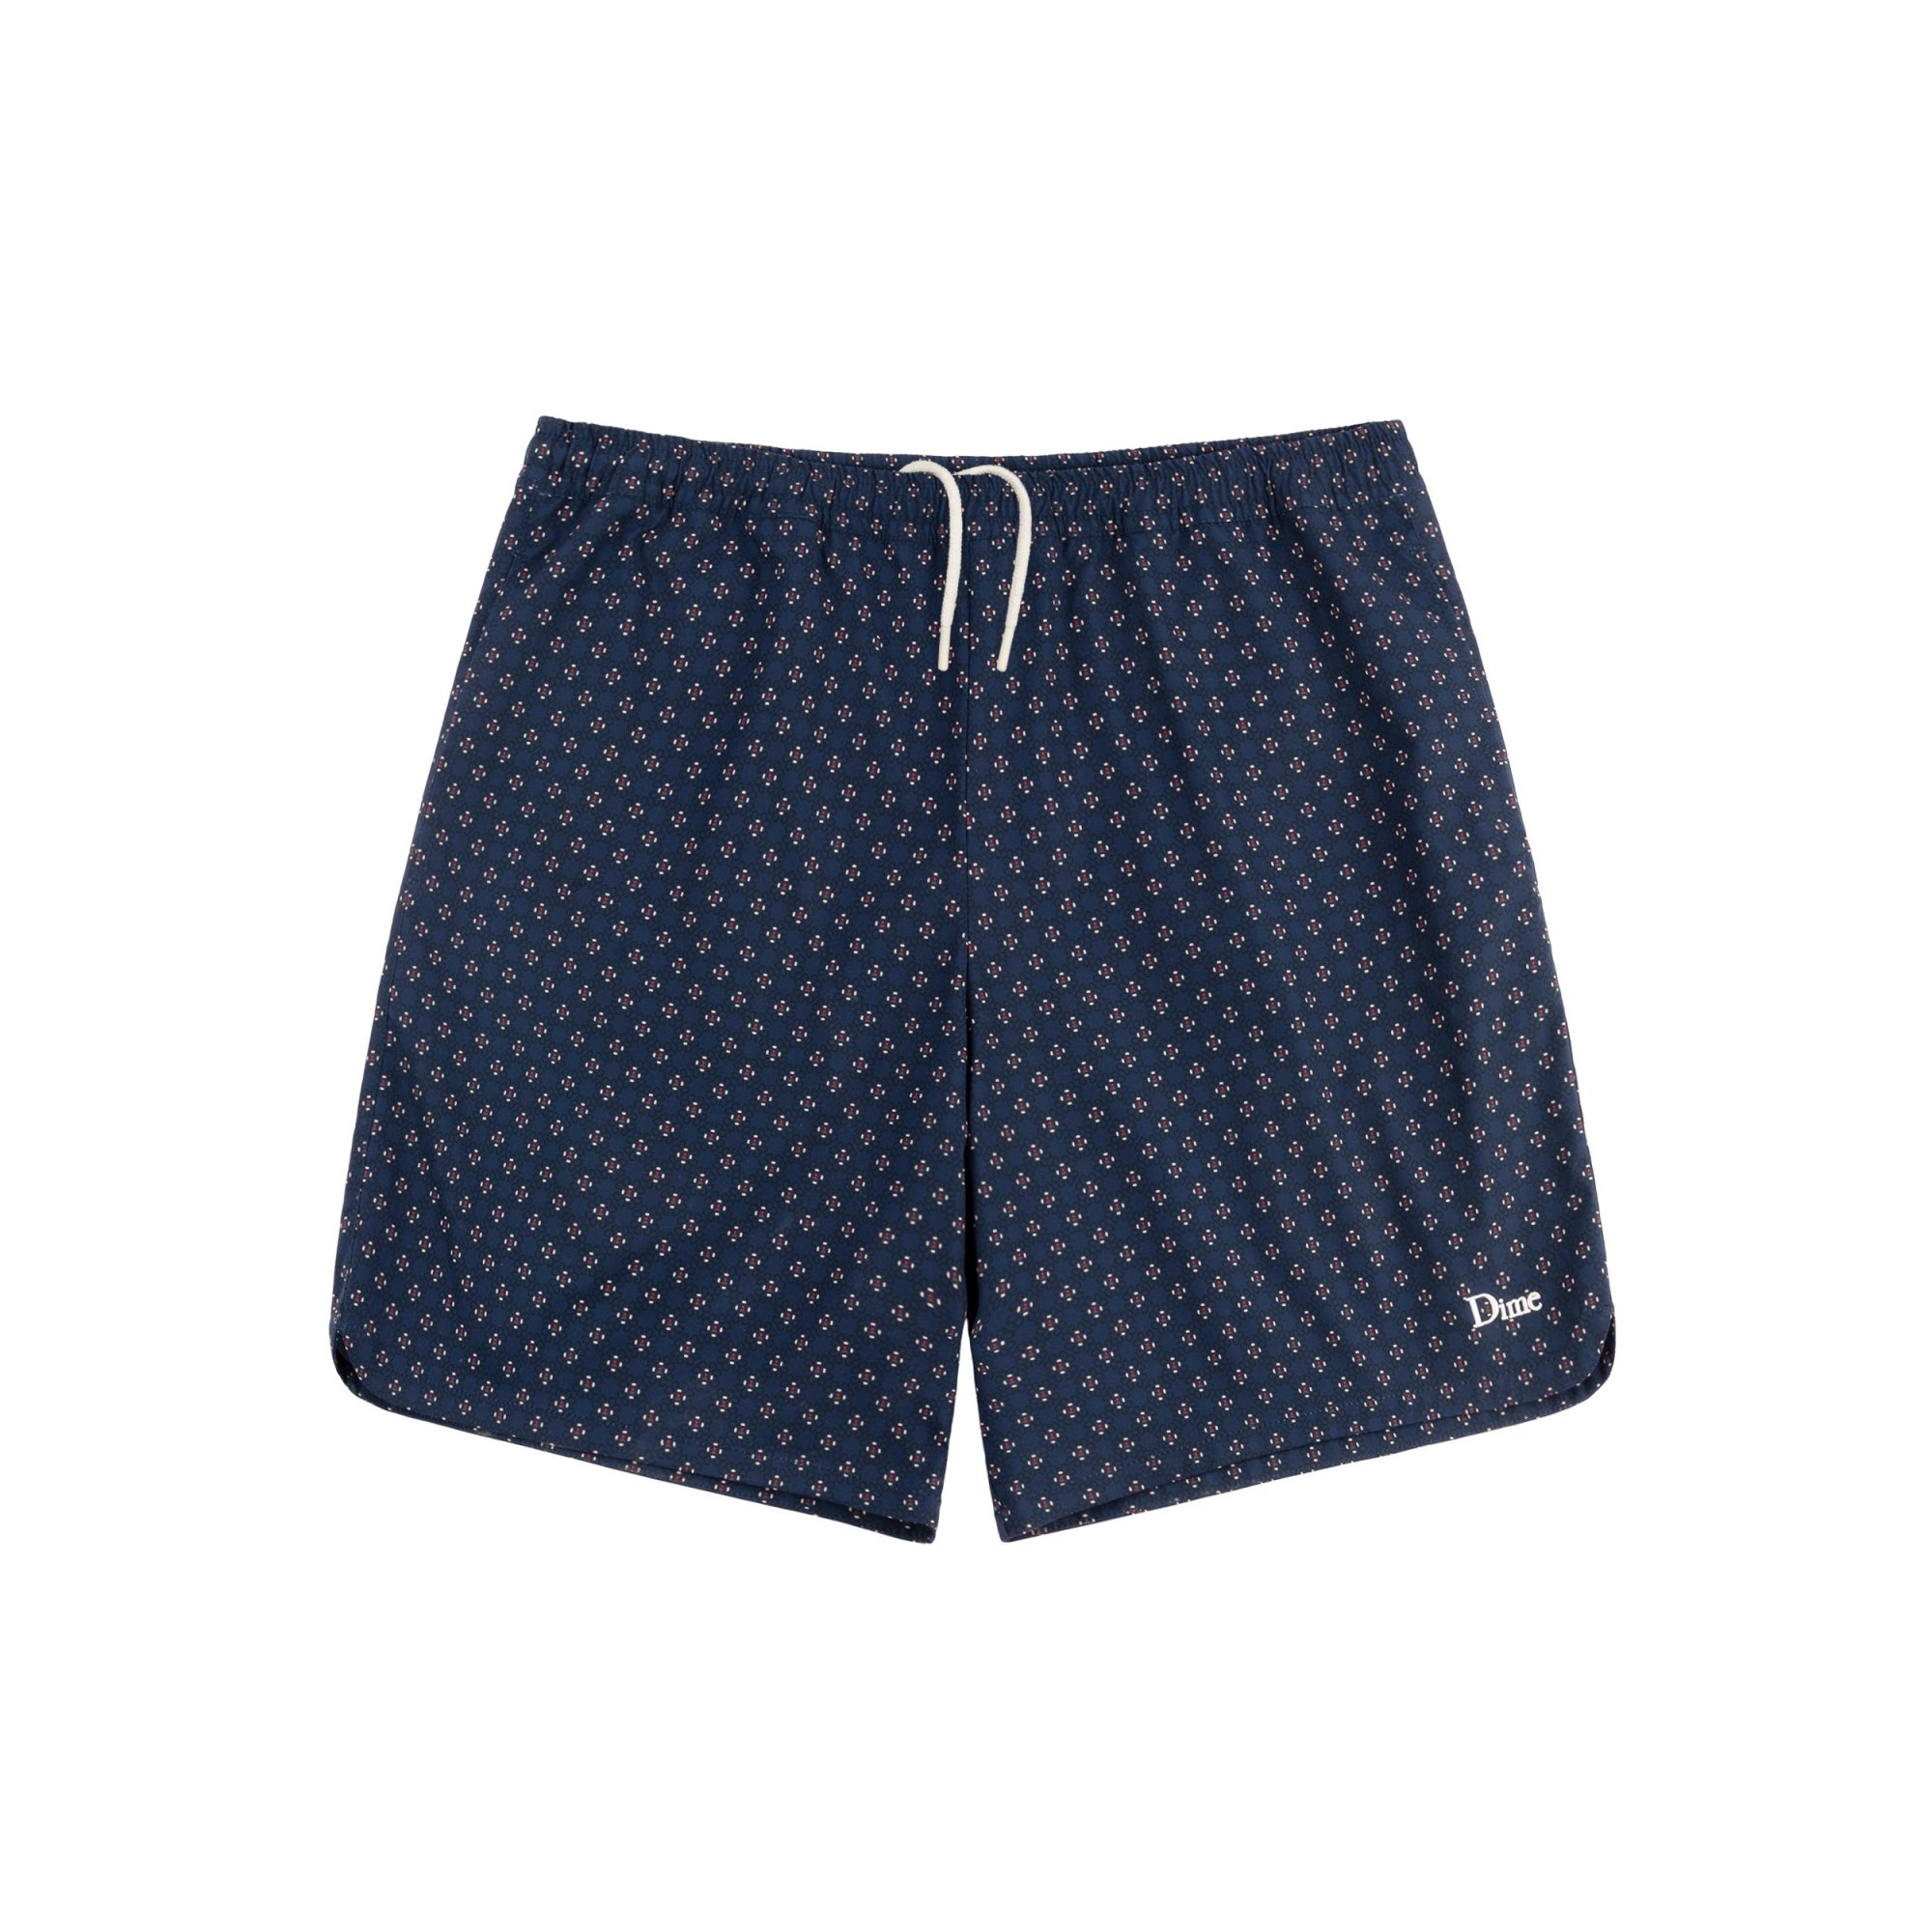 DIME<br>CLASSIC SHORTS<br>